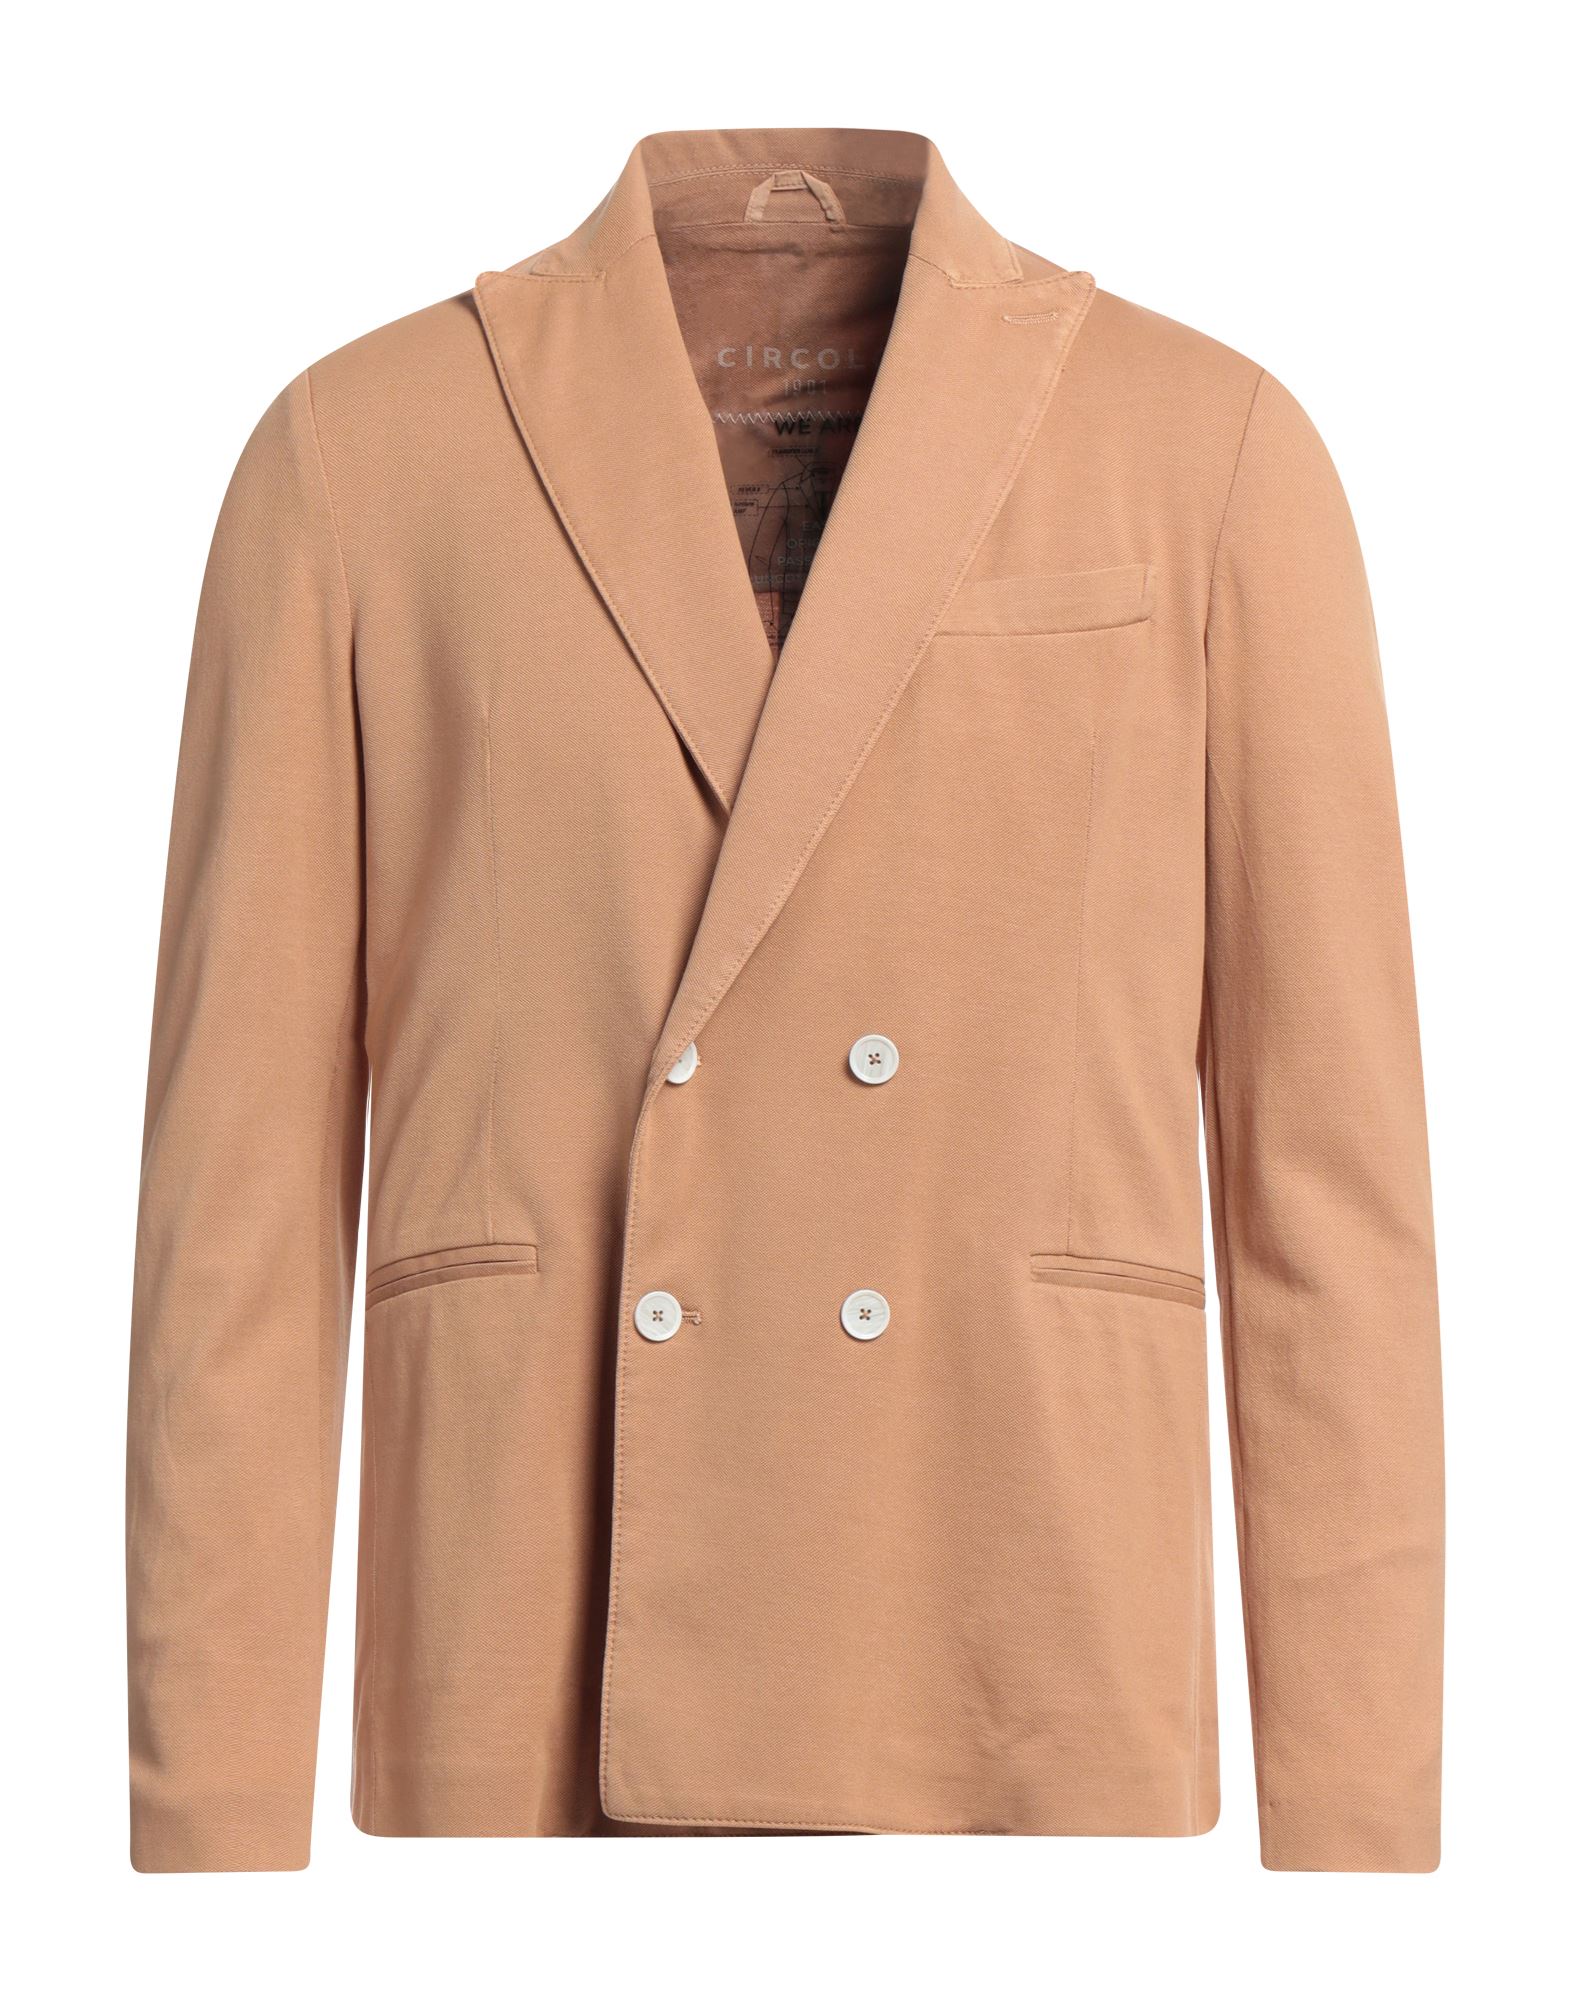 Circolo 1901 Suit Jackets In Beige